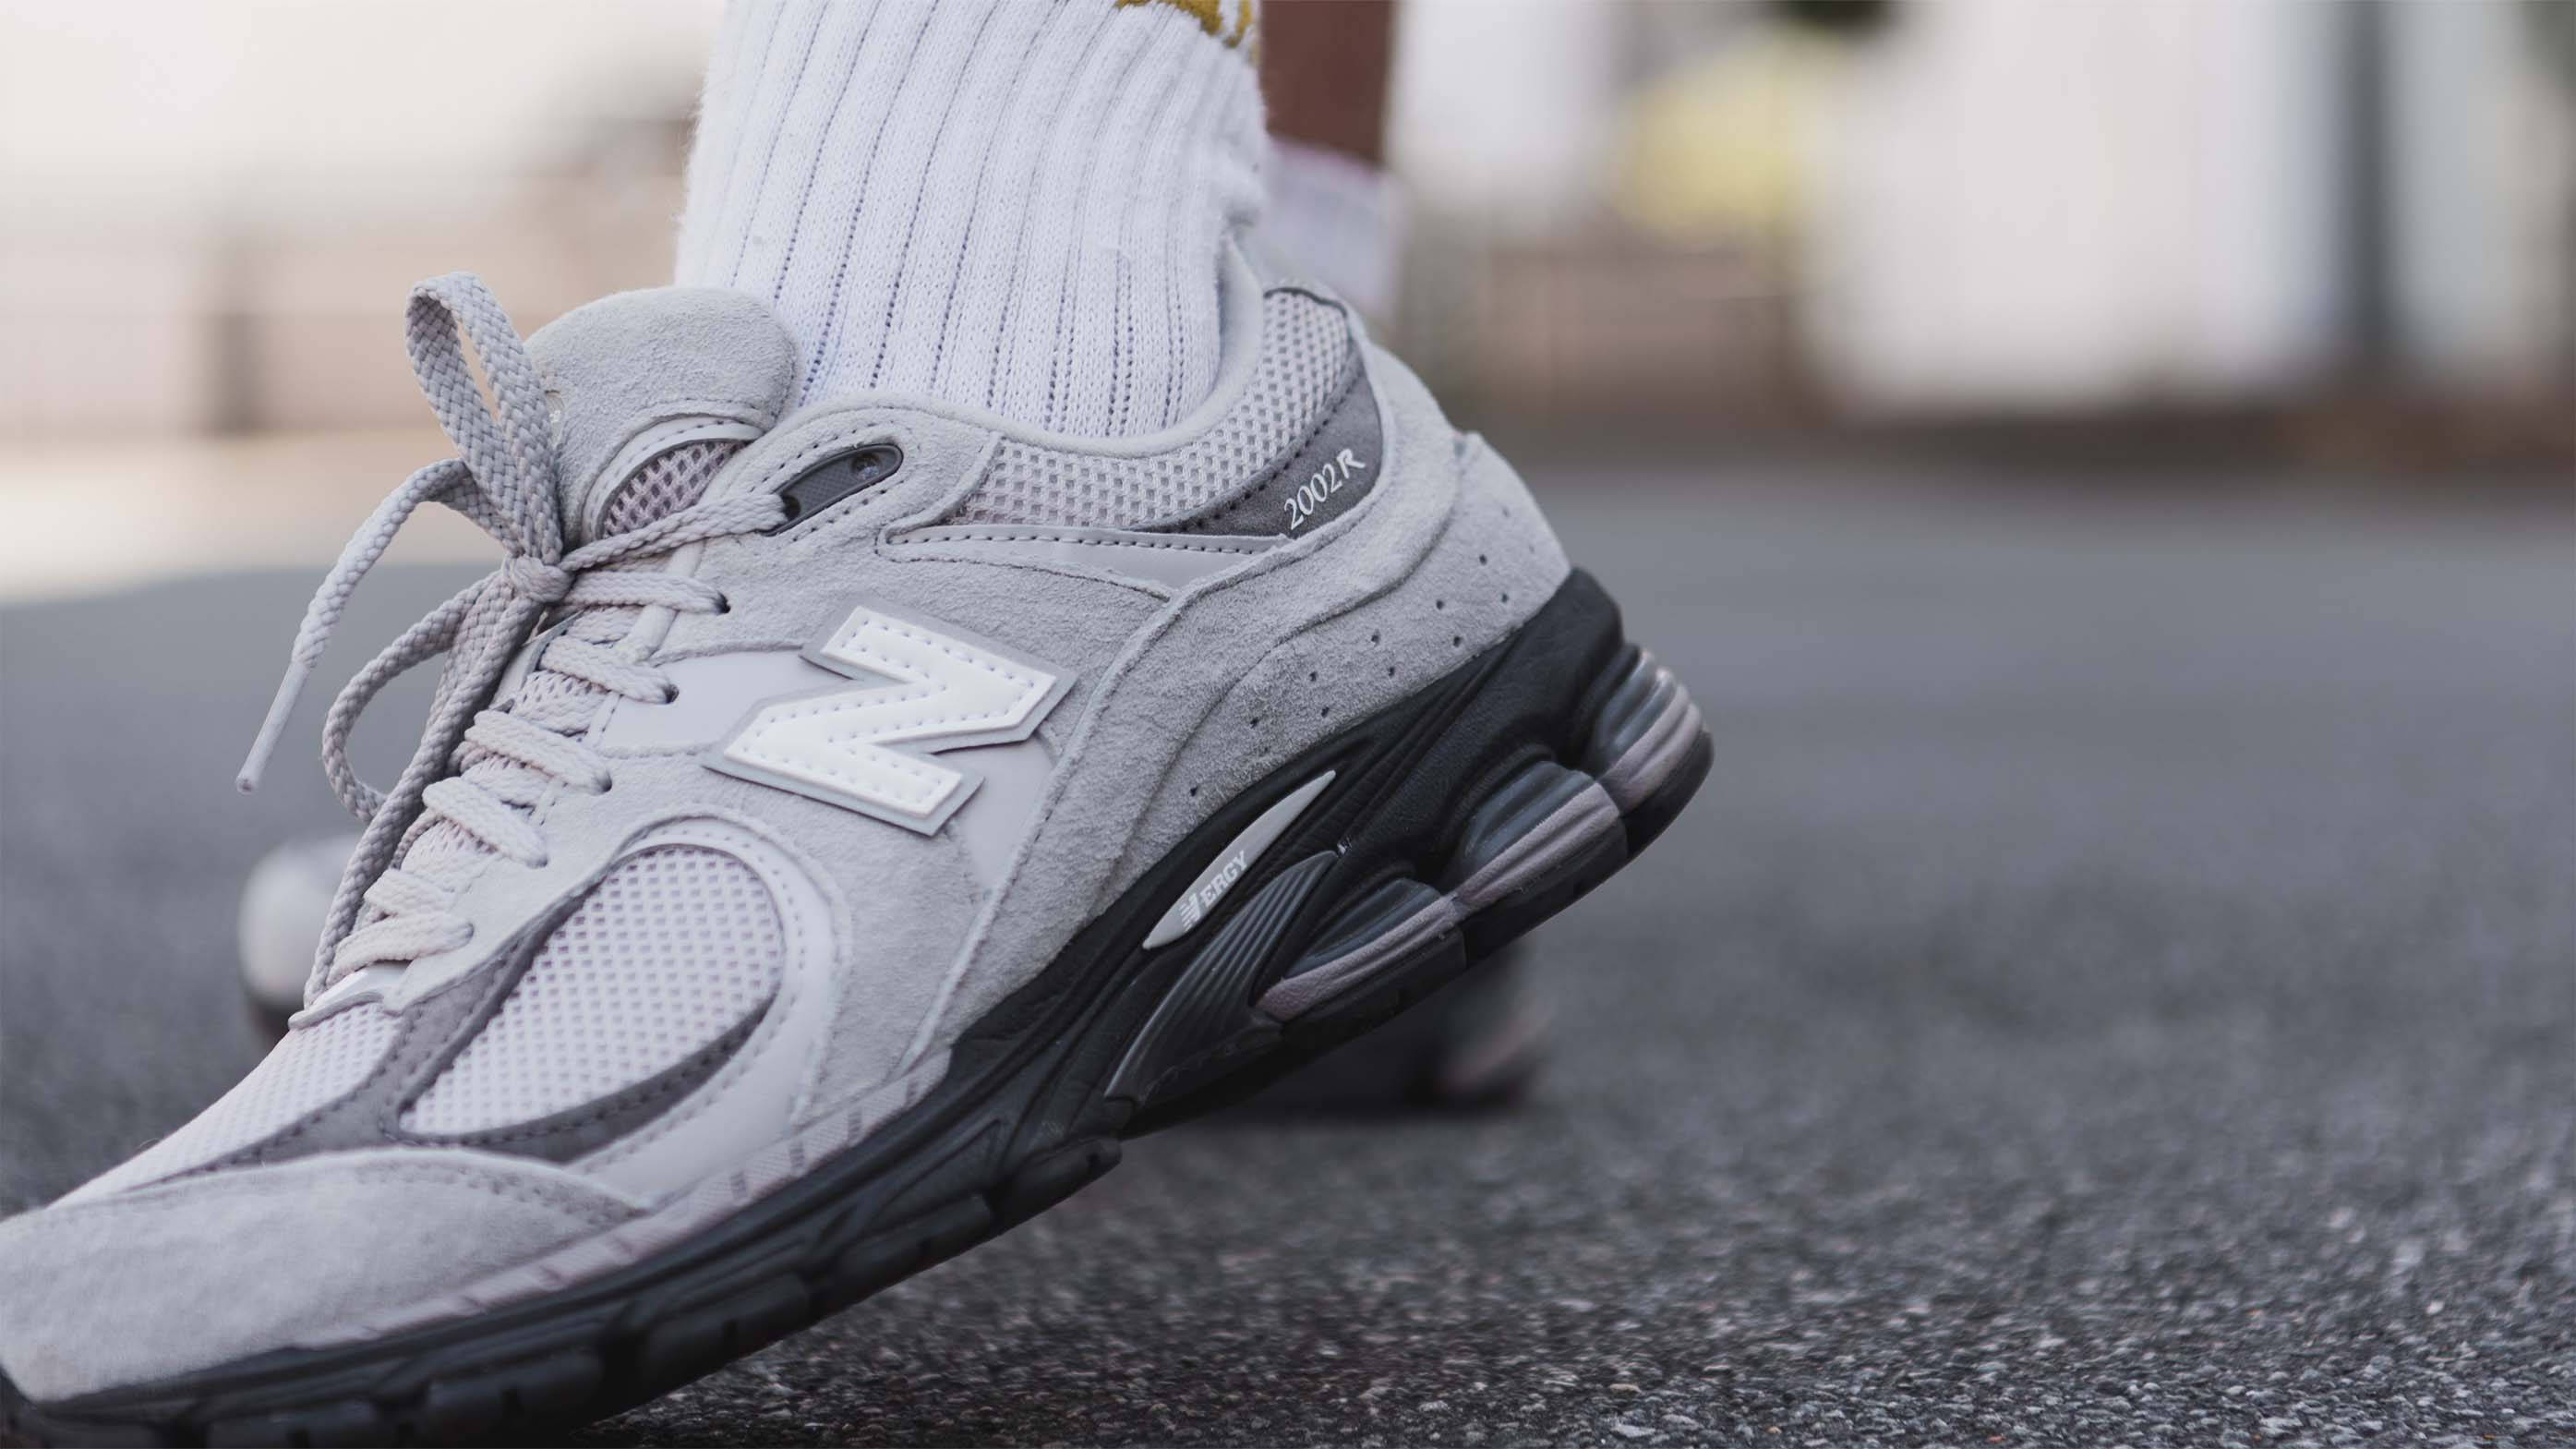 New Balance 2002R Sizing: How Do They Fit